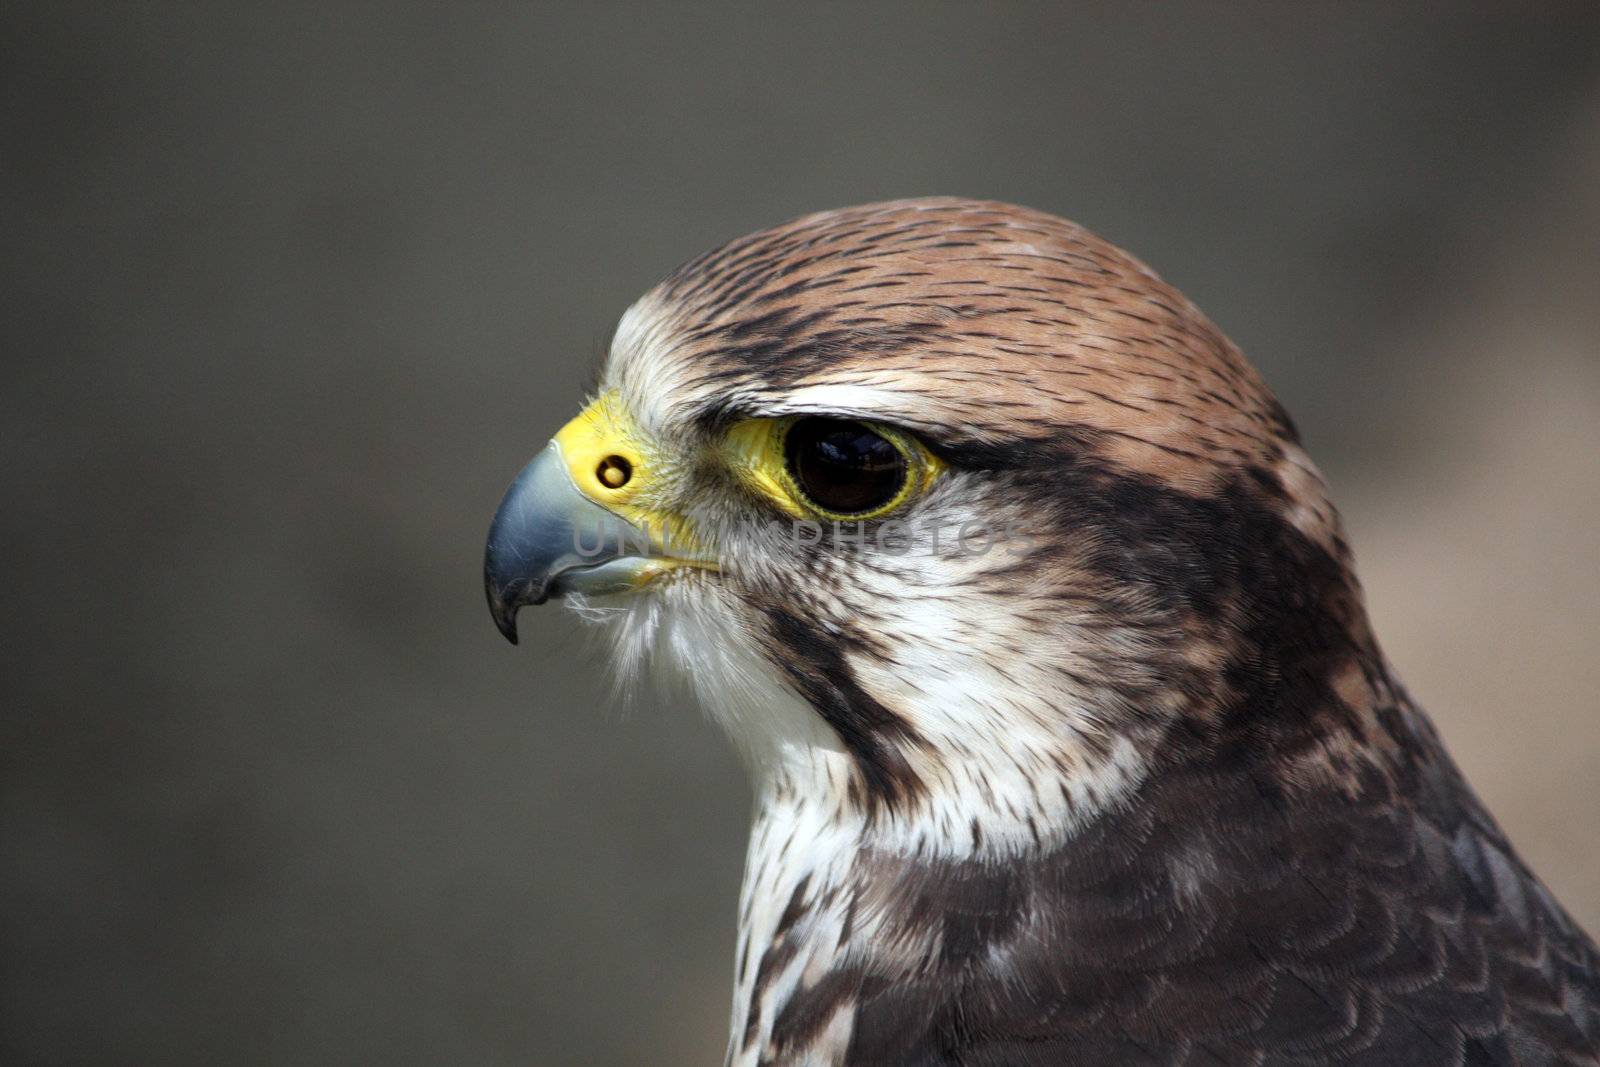 Closeup view of the head of a saker falcon.